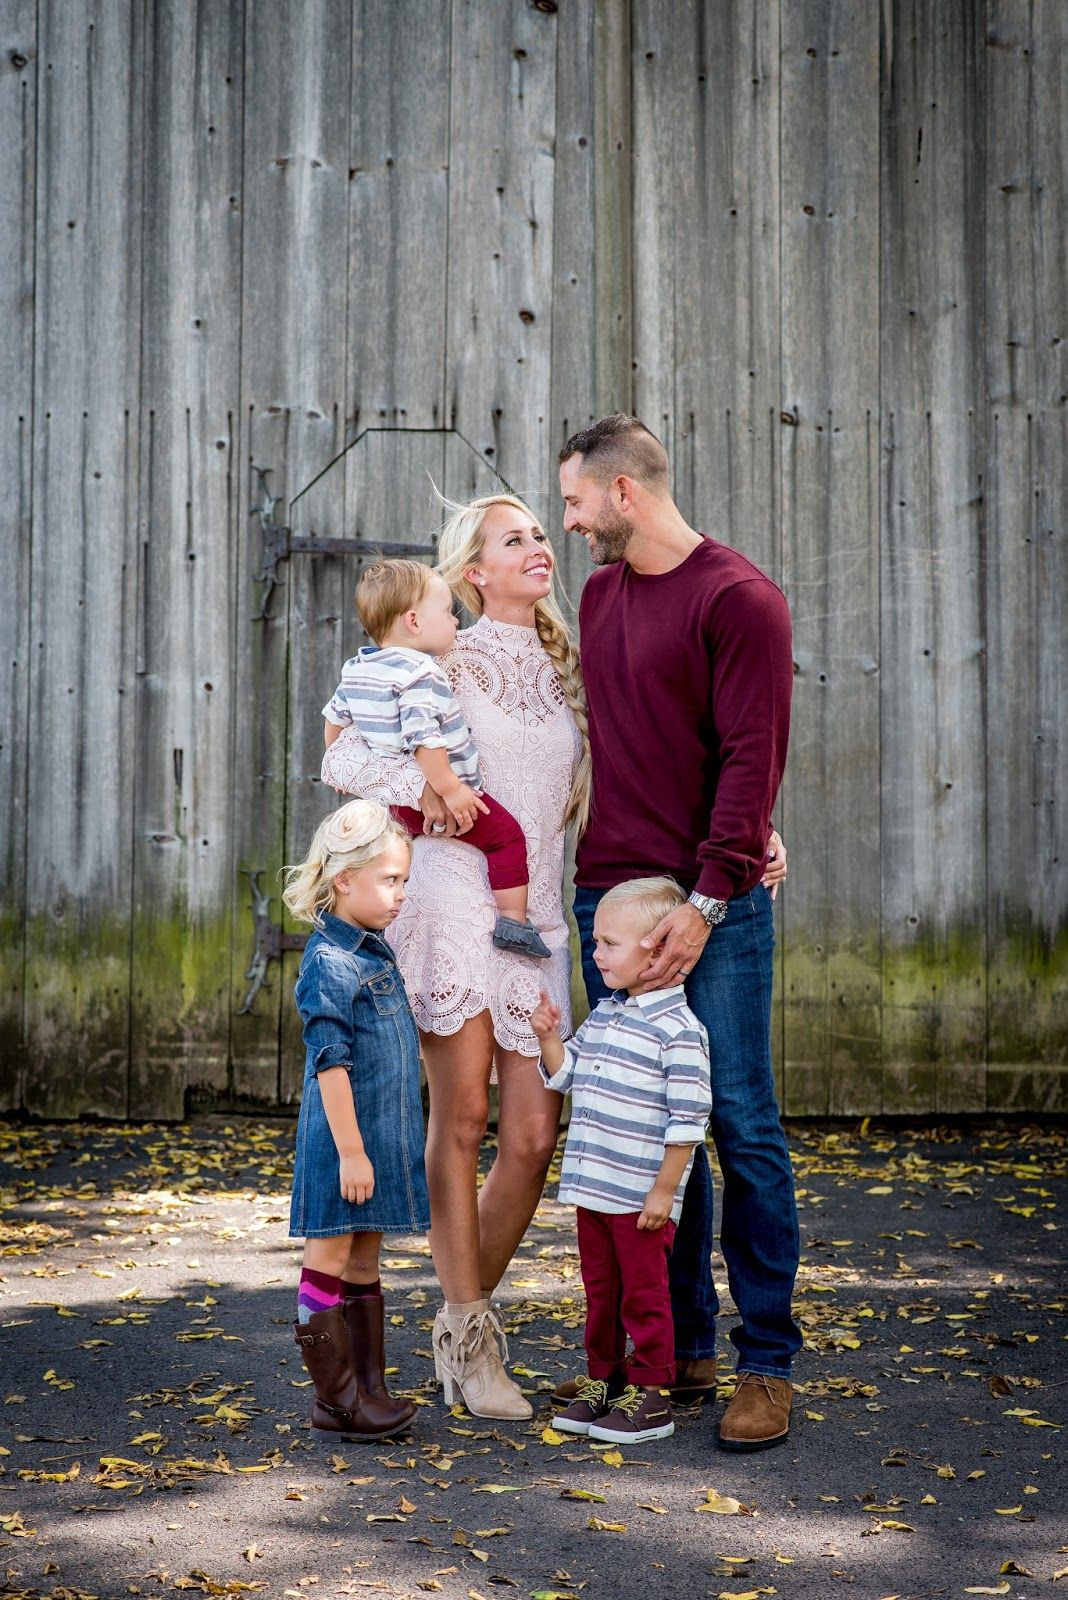 Family Fall Pictures Clothing Ideas
 How to Coordinate Outfits for family photos